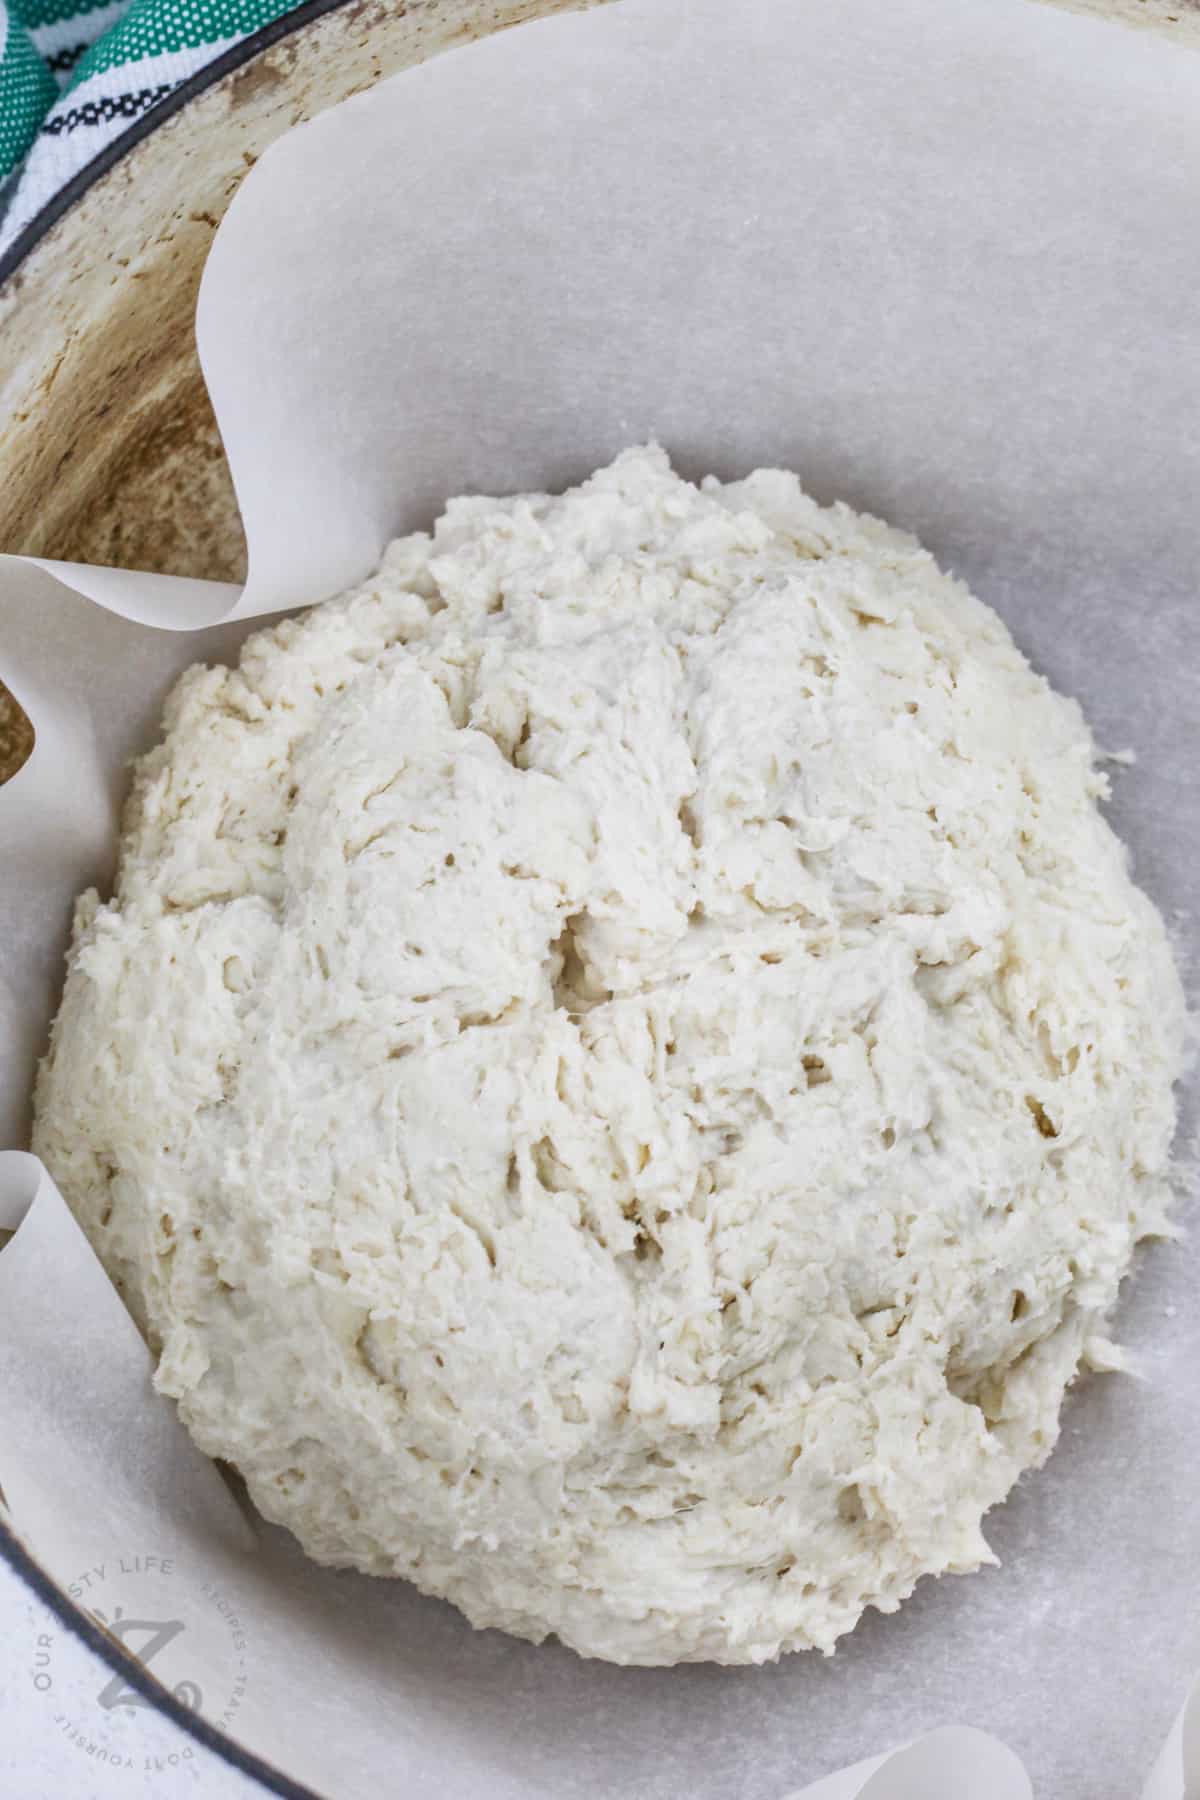 Irish Soda Bread after mixing and forming into a ball